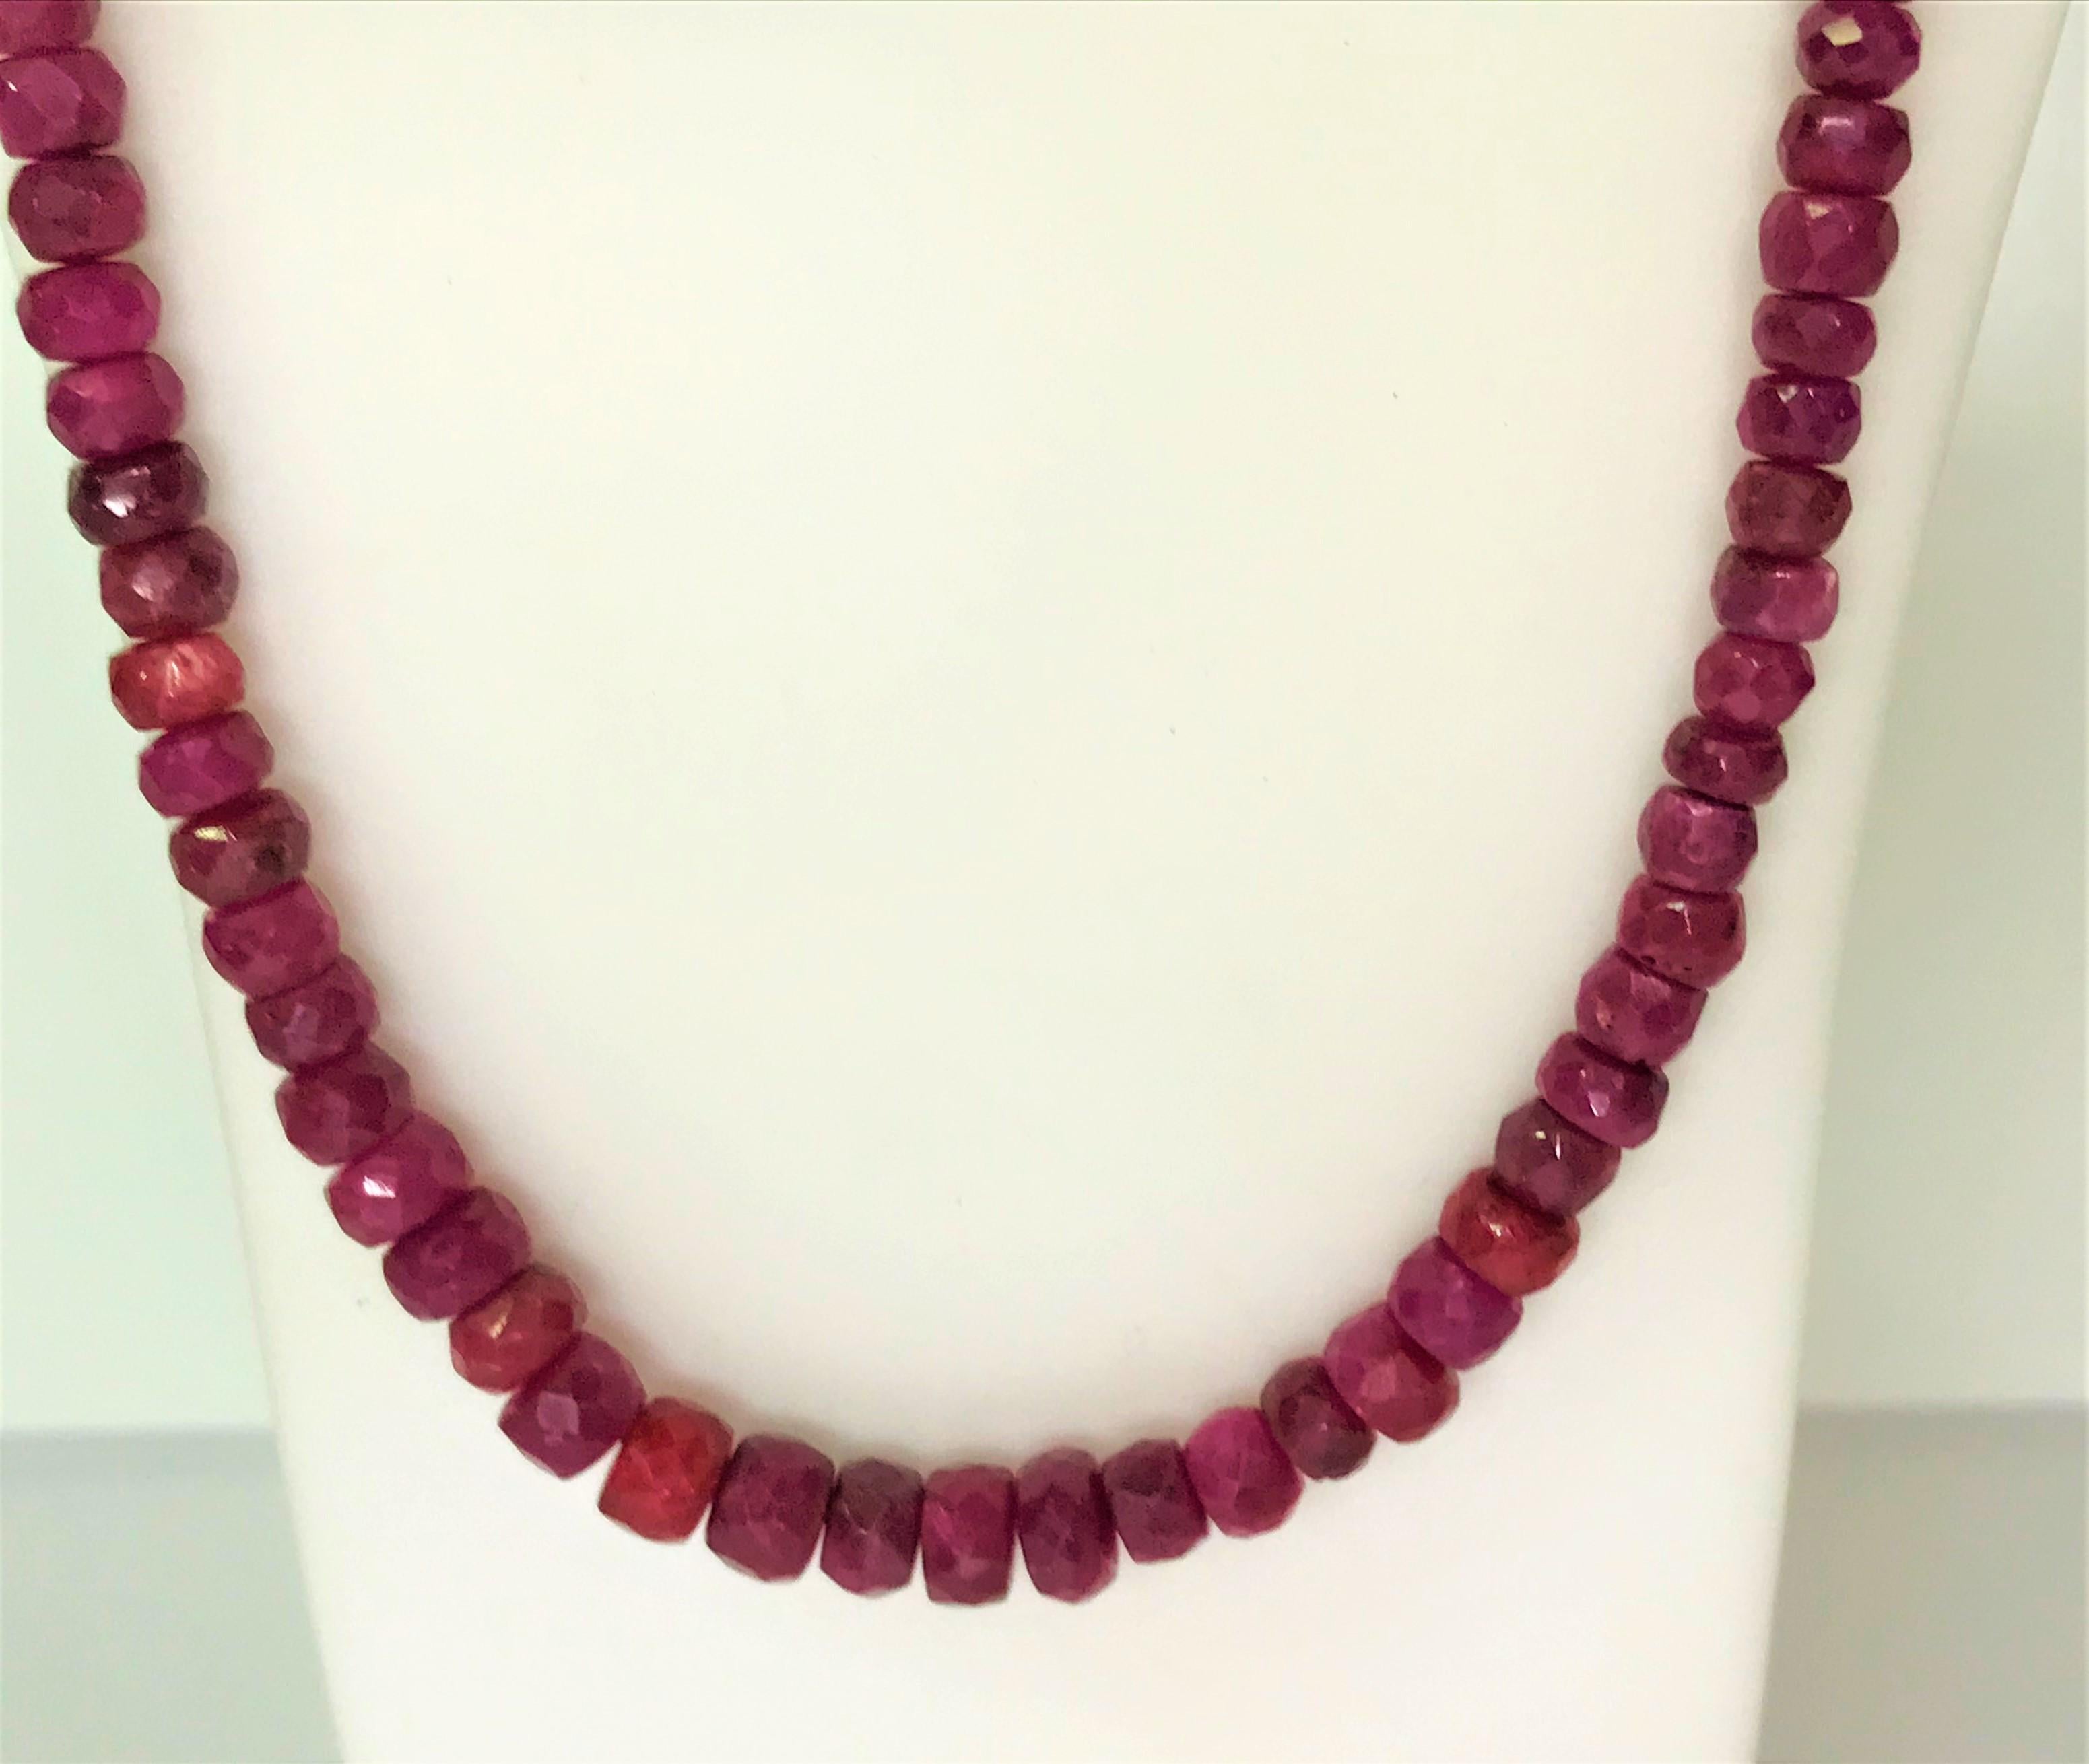 This necklace is a perfect addition to any outfit!  Light and and easy to wear.
Sterling silver toggle clasp with beaded accents - wear the clasp in front or back for different looks.
Ruby beads that range in size from approximately 4mm to 6mm
18